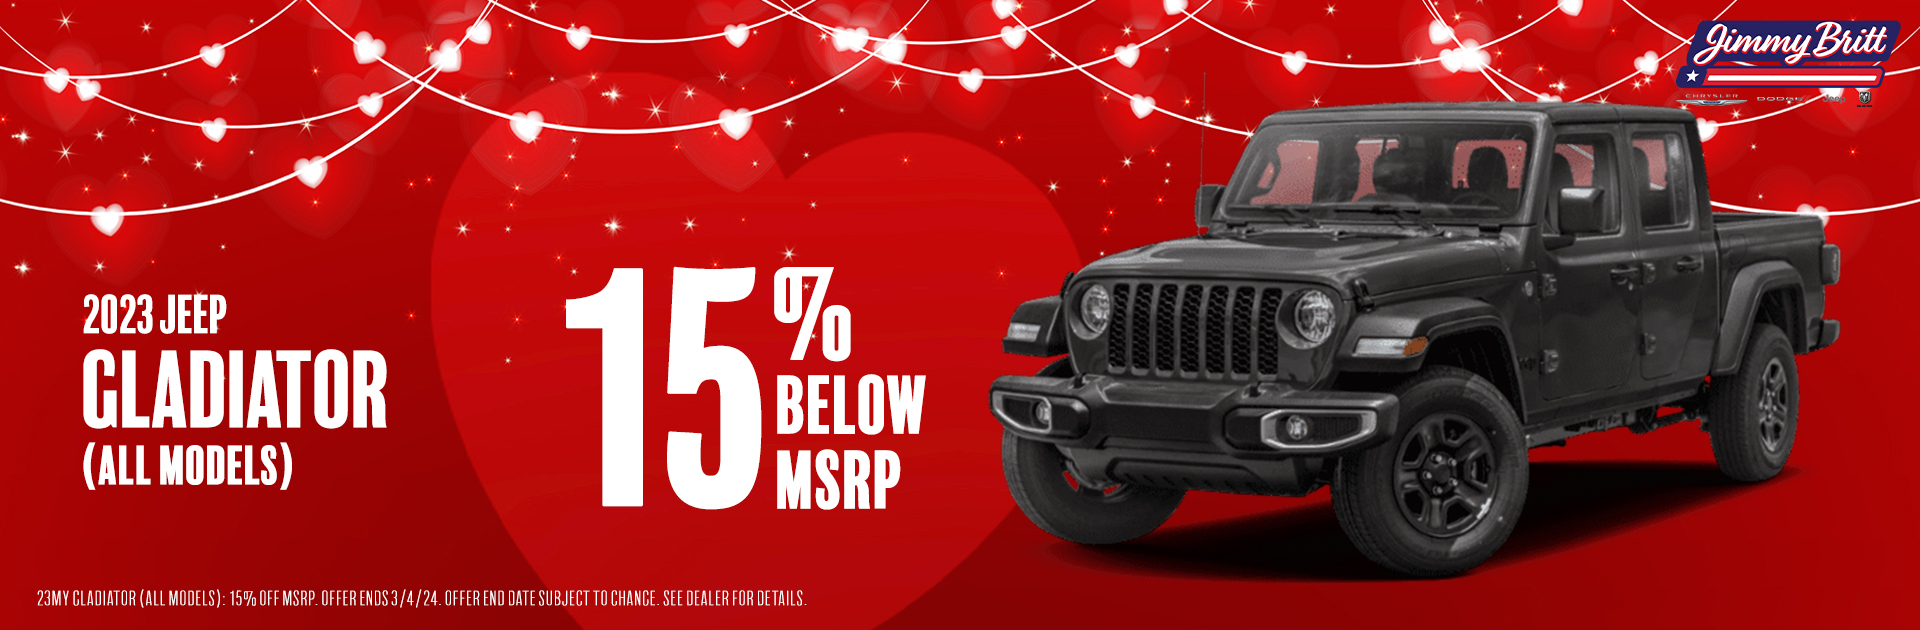 2023 Jeep Gladiator: Purchase and Get 10% below MSRP